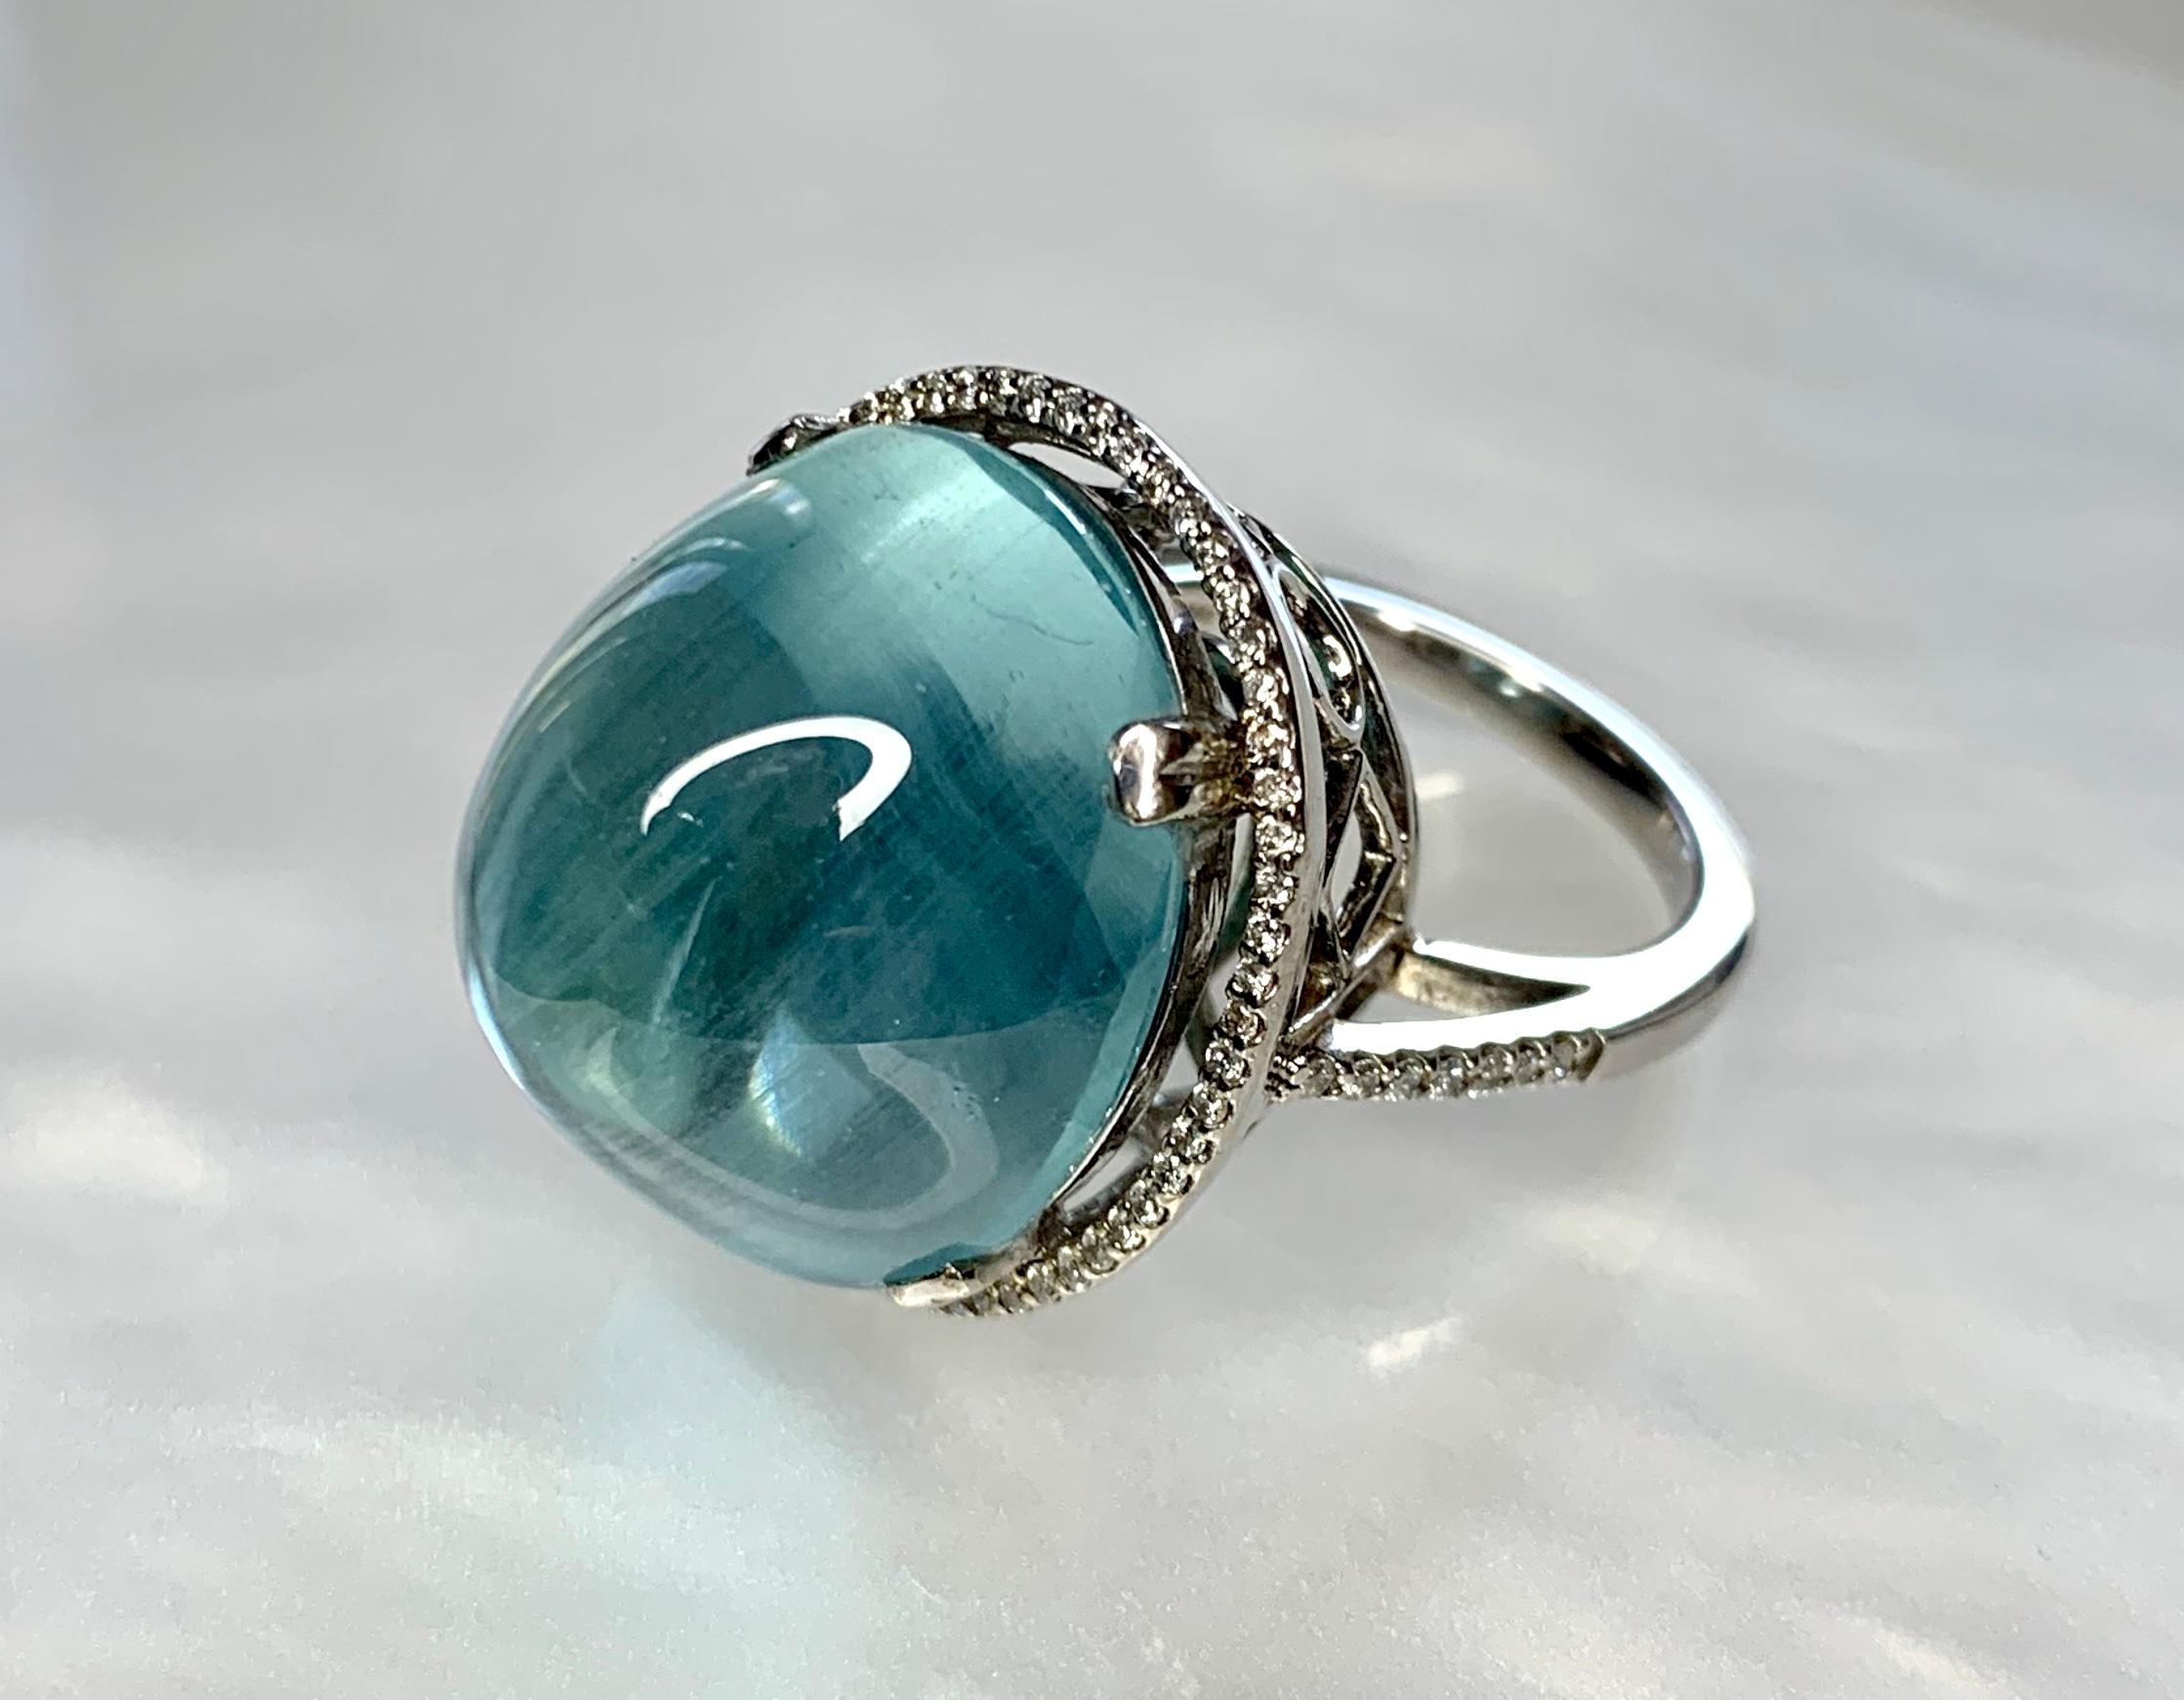 A captivating and luxurious sea- foam green aquamarine piece reminiscent of the first steps we take into the clear blue ocean waters. This super sized cocktail ring featuring a high domed 24.21 carat cabochon center stone surrounded by a halo of